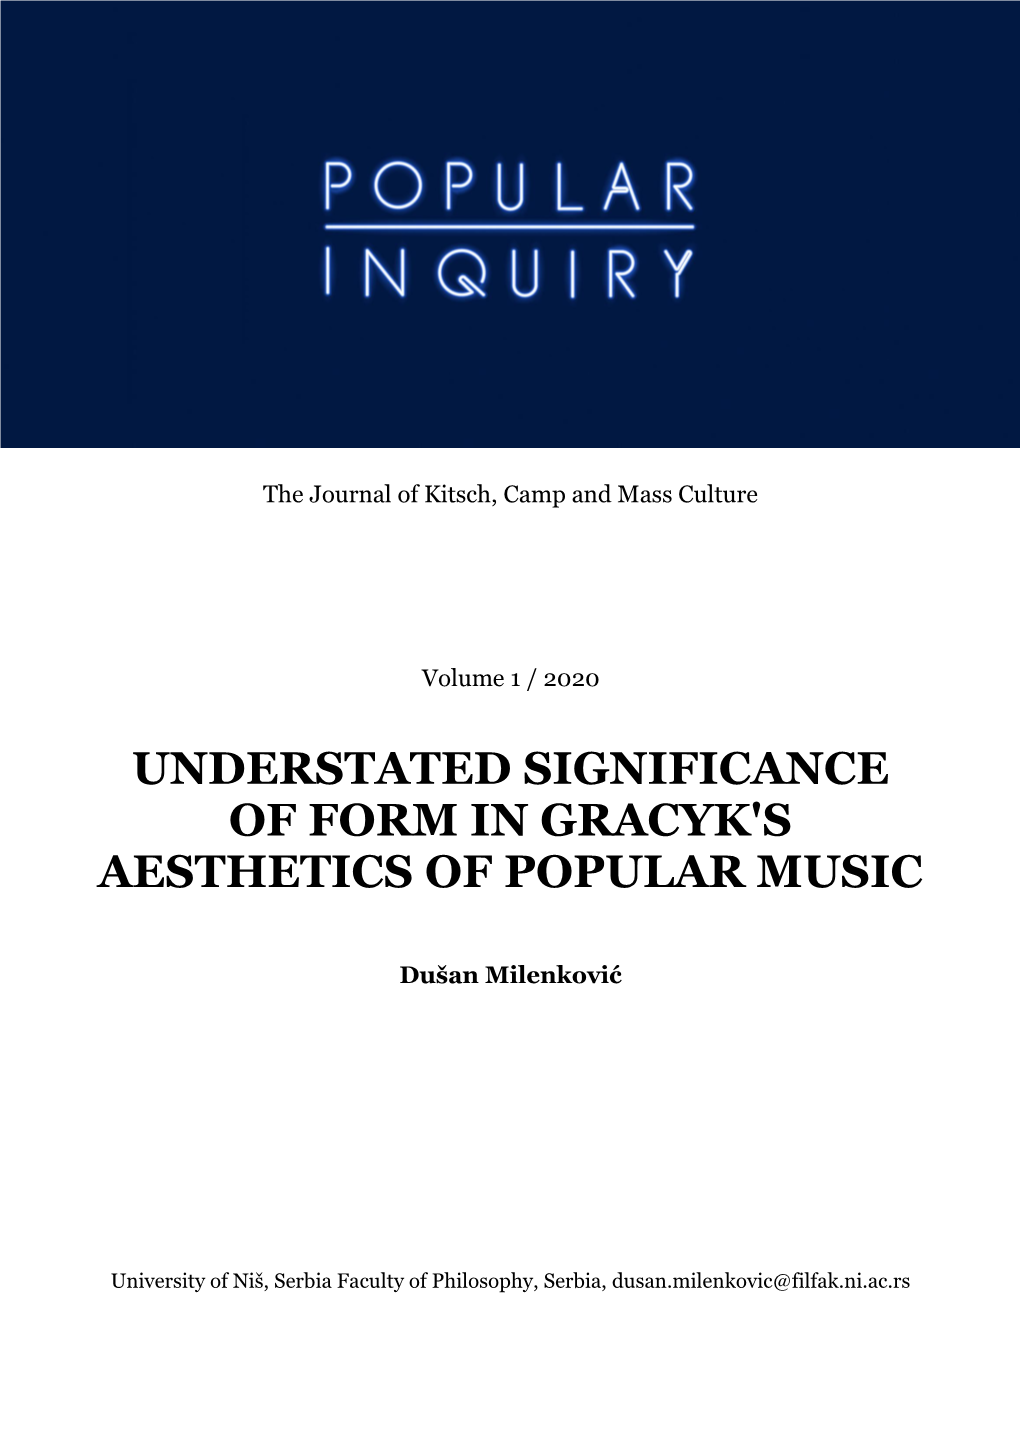 Understated Significance of Form in Gracyk's Aesthetics of Popular Music